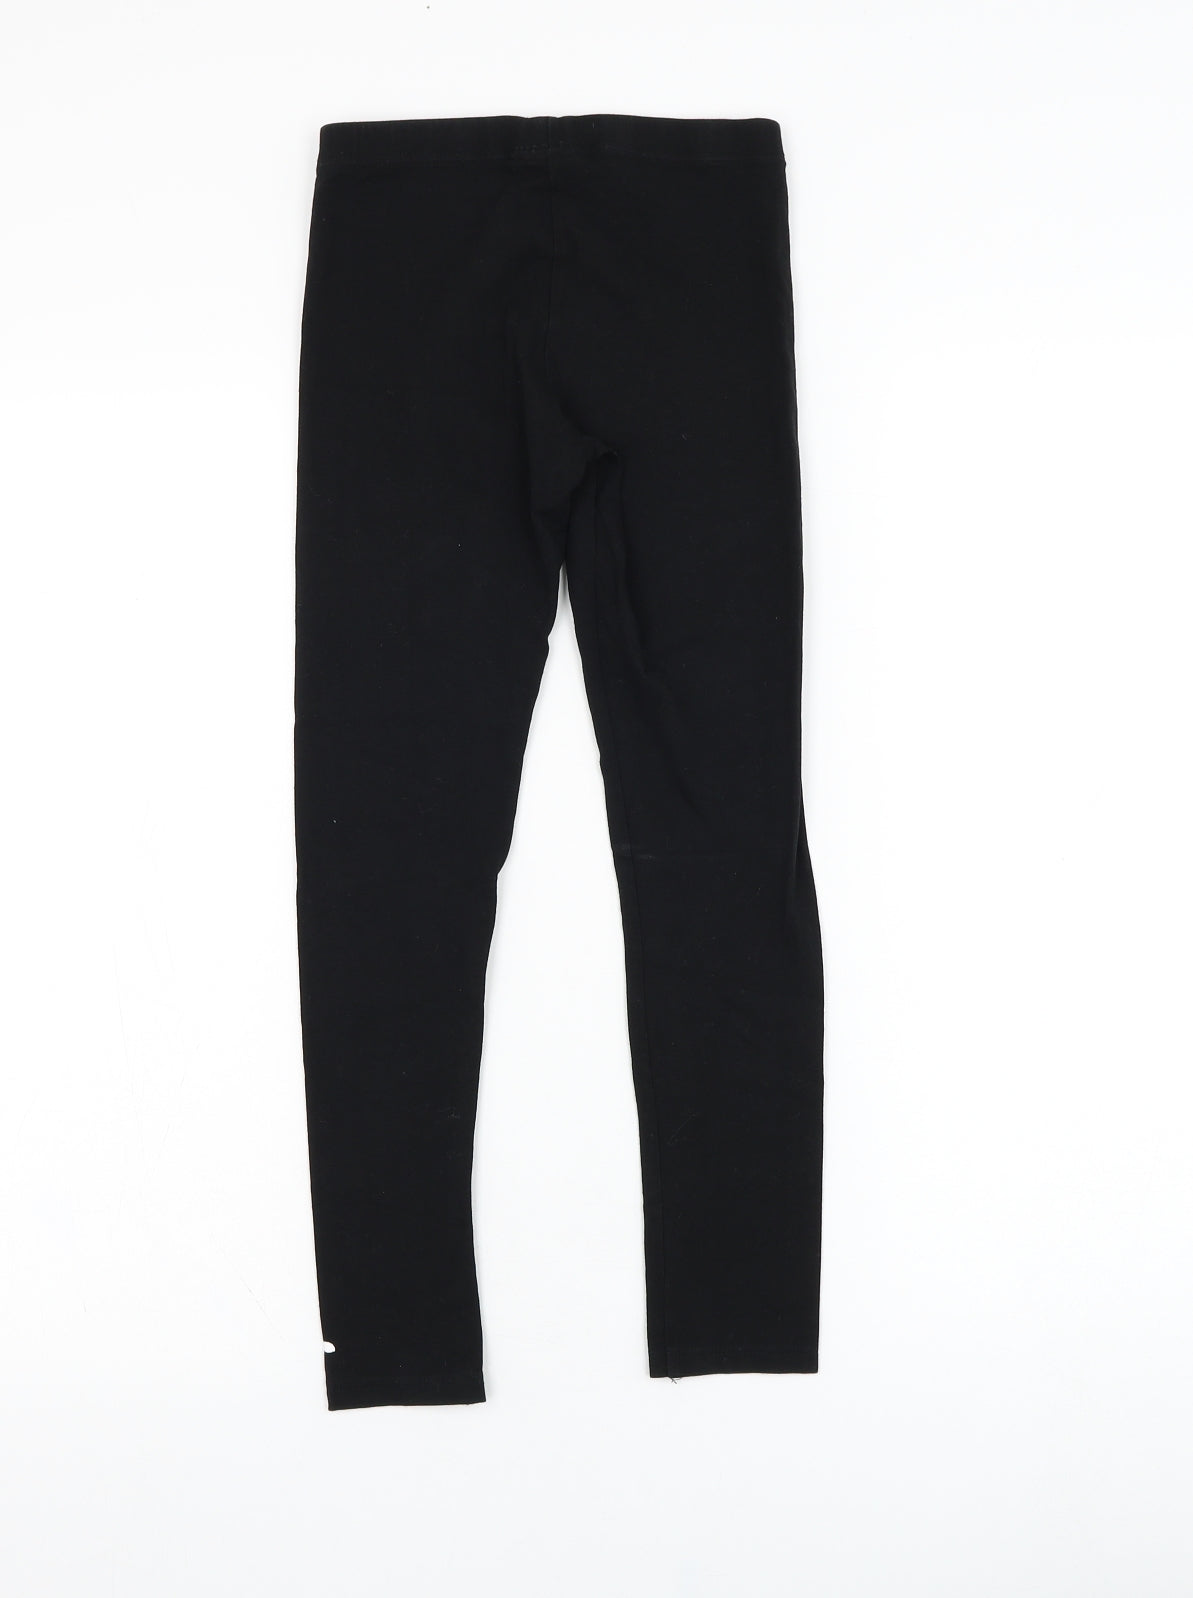 F&F Girls Black  Cotton Jogger Trousers Size 9 Years  Regular Pullover - Friends